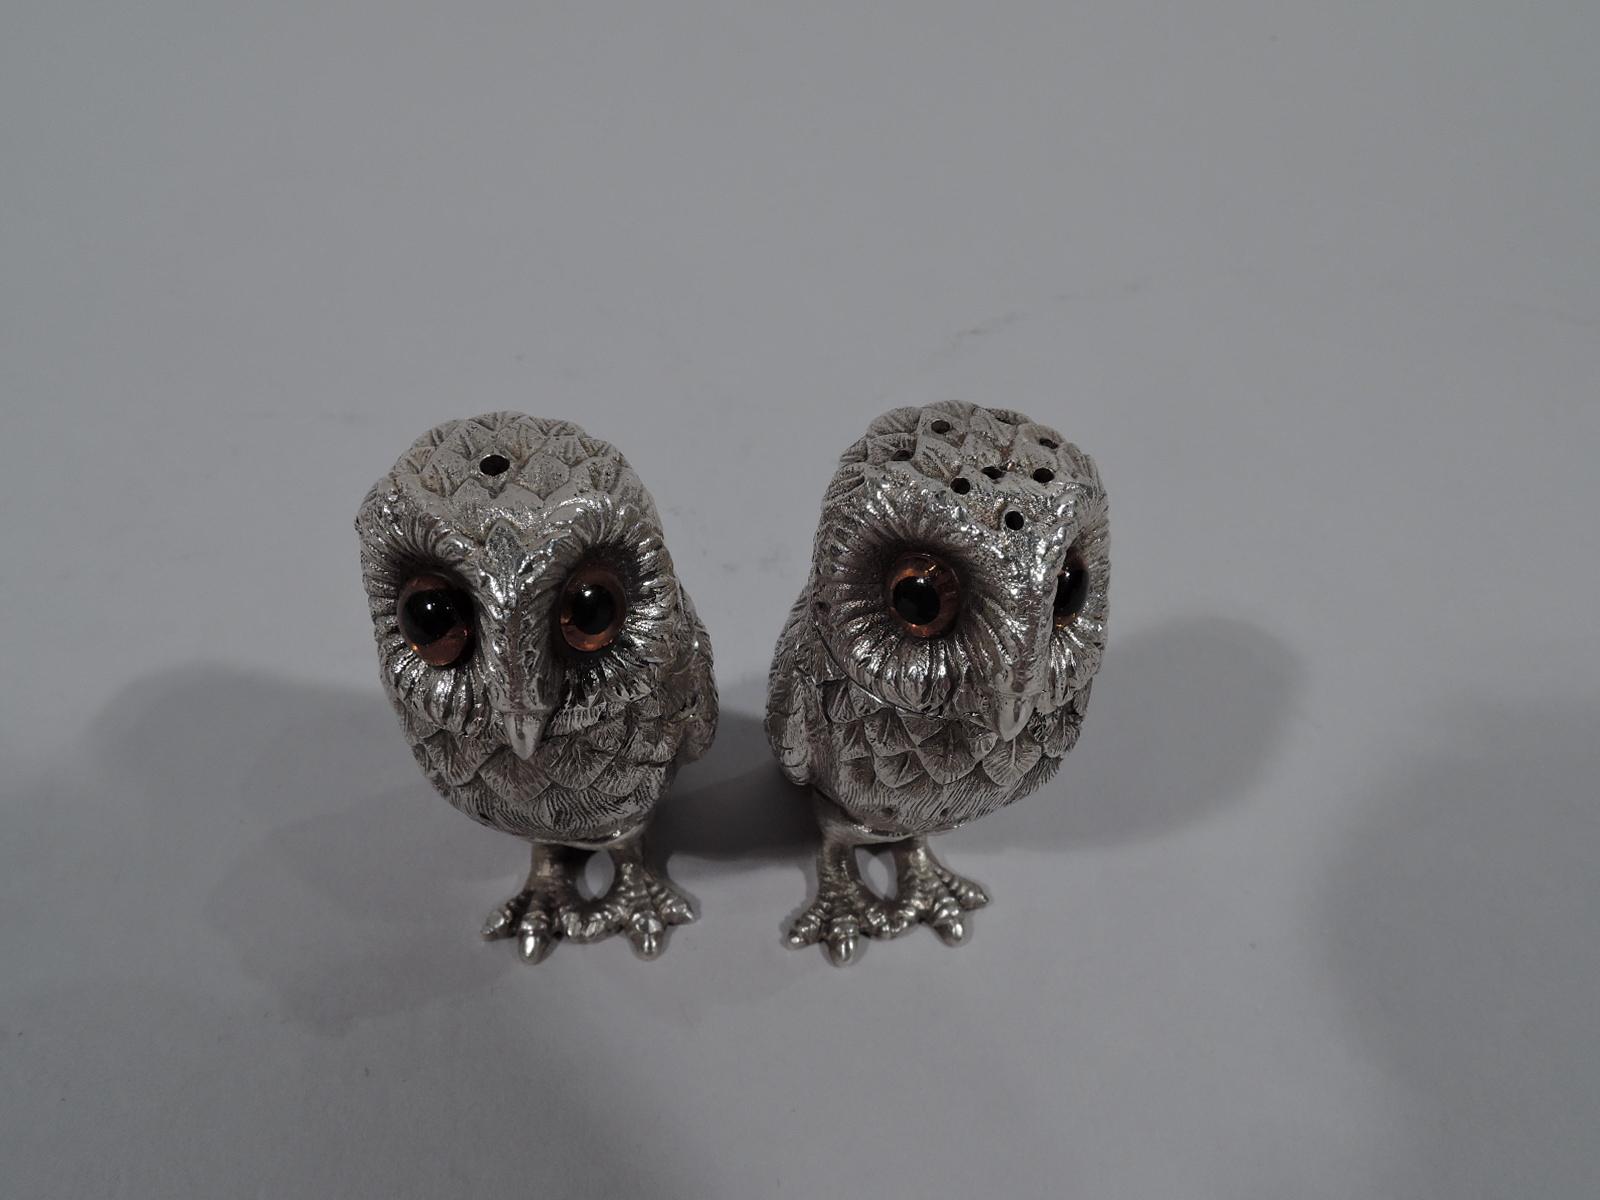 Traditional sterling silver figural owl salt and pepper shakers. Made by Tiffany & Co. in England in London in 1971. Each: Erect with tucked-down wings, dense imbricated feathers, and scaly talons. Dark glass eyes that suggest the beady and